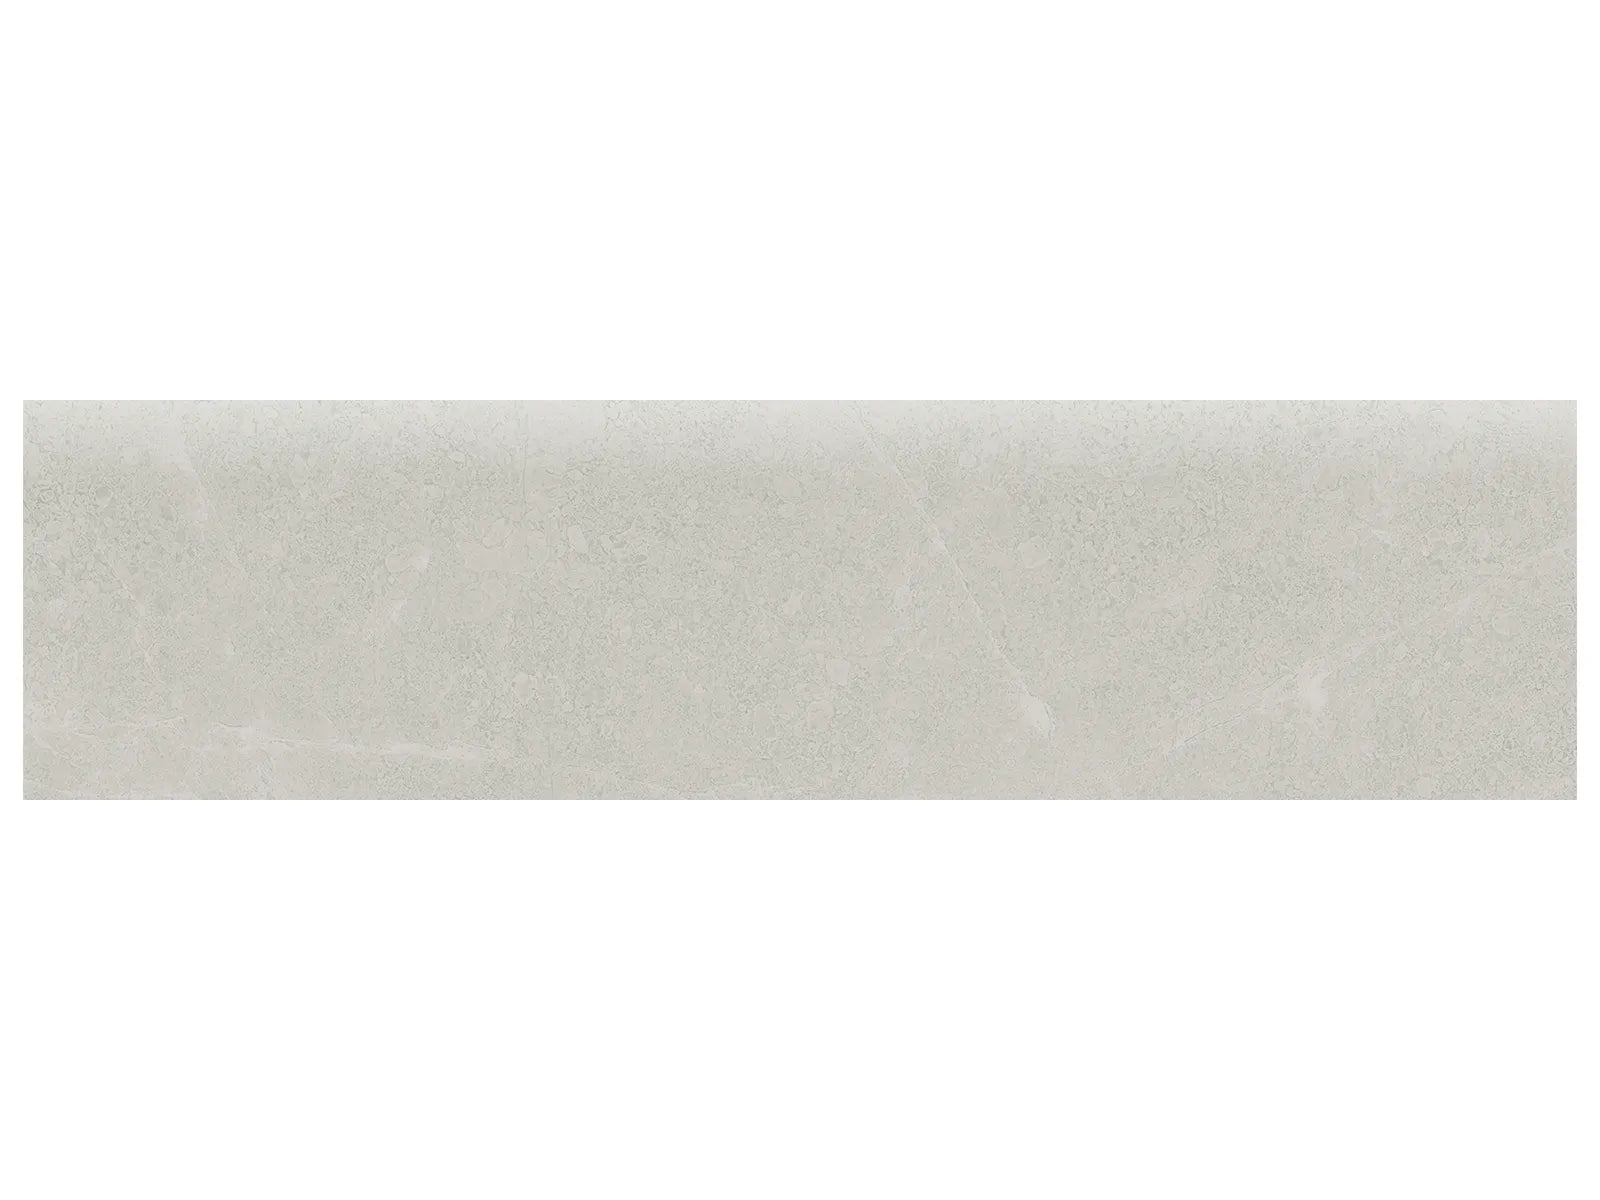 grigio pattern glazed porcelain bullnose molding from torino anatolia collection distributed by surface group international matte finish straight edge edge 3x12 bar shape